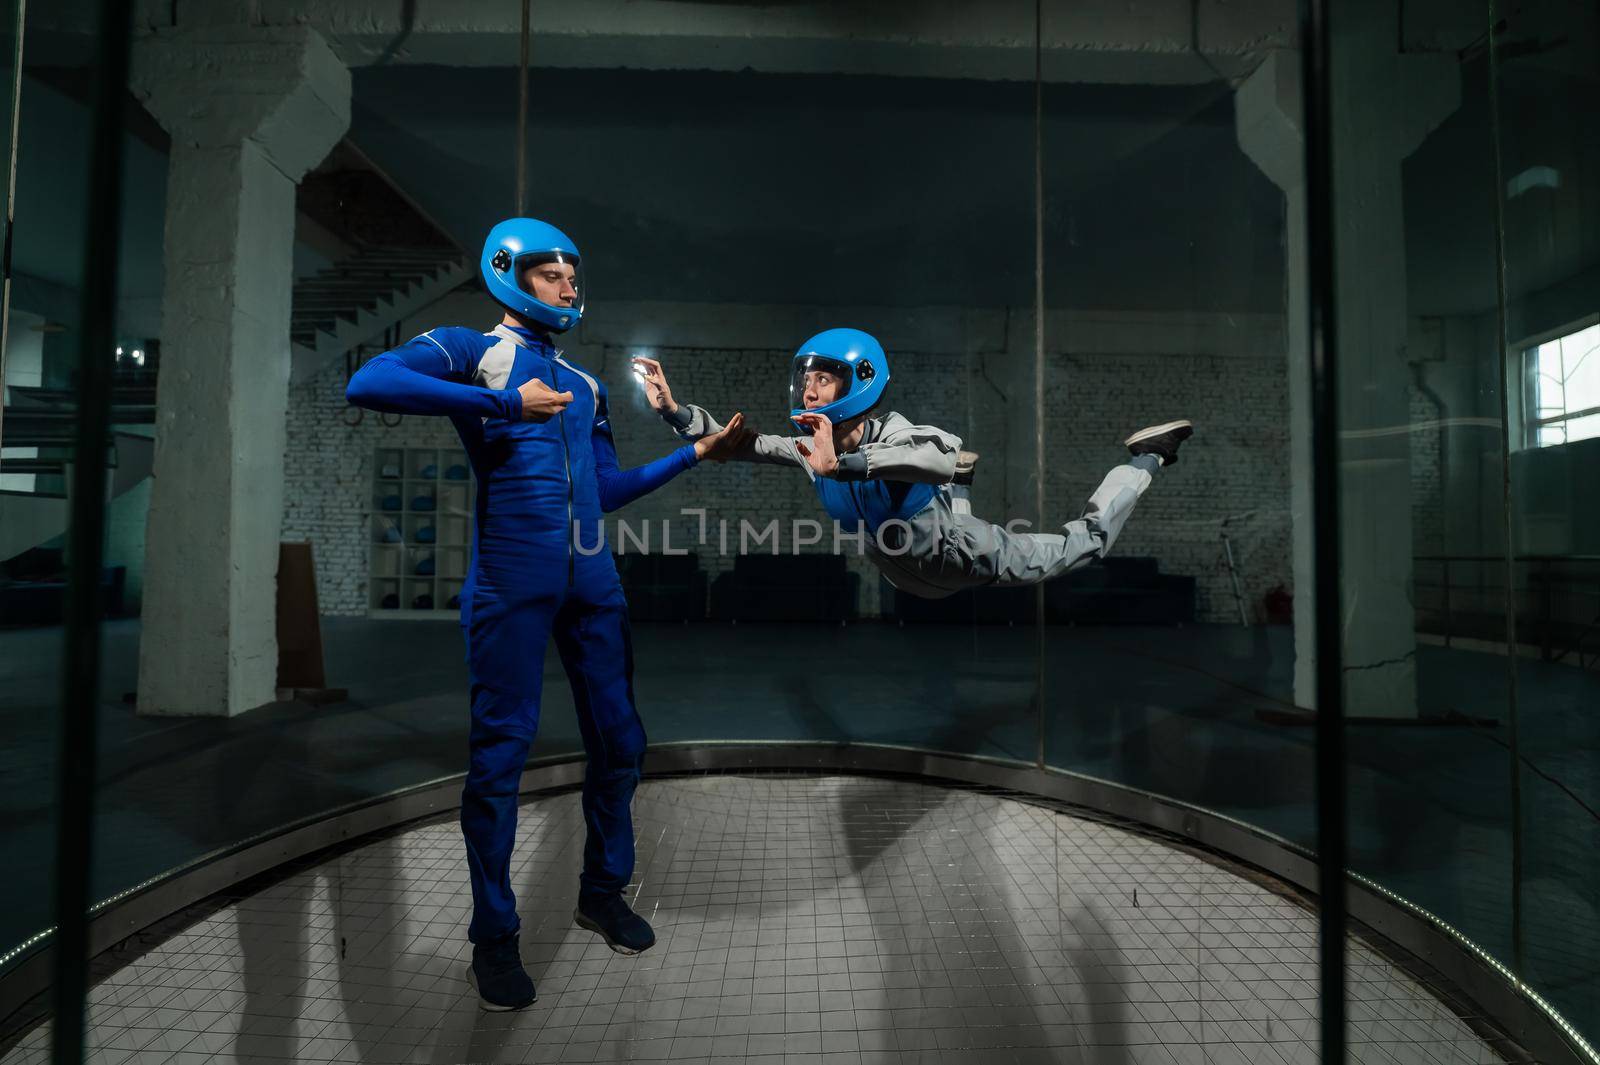 A man teaches a woman how to fly in a wind tunnel. Free fall simulator. by mrwed54